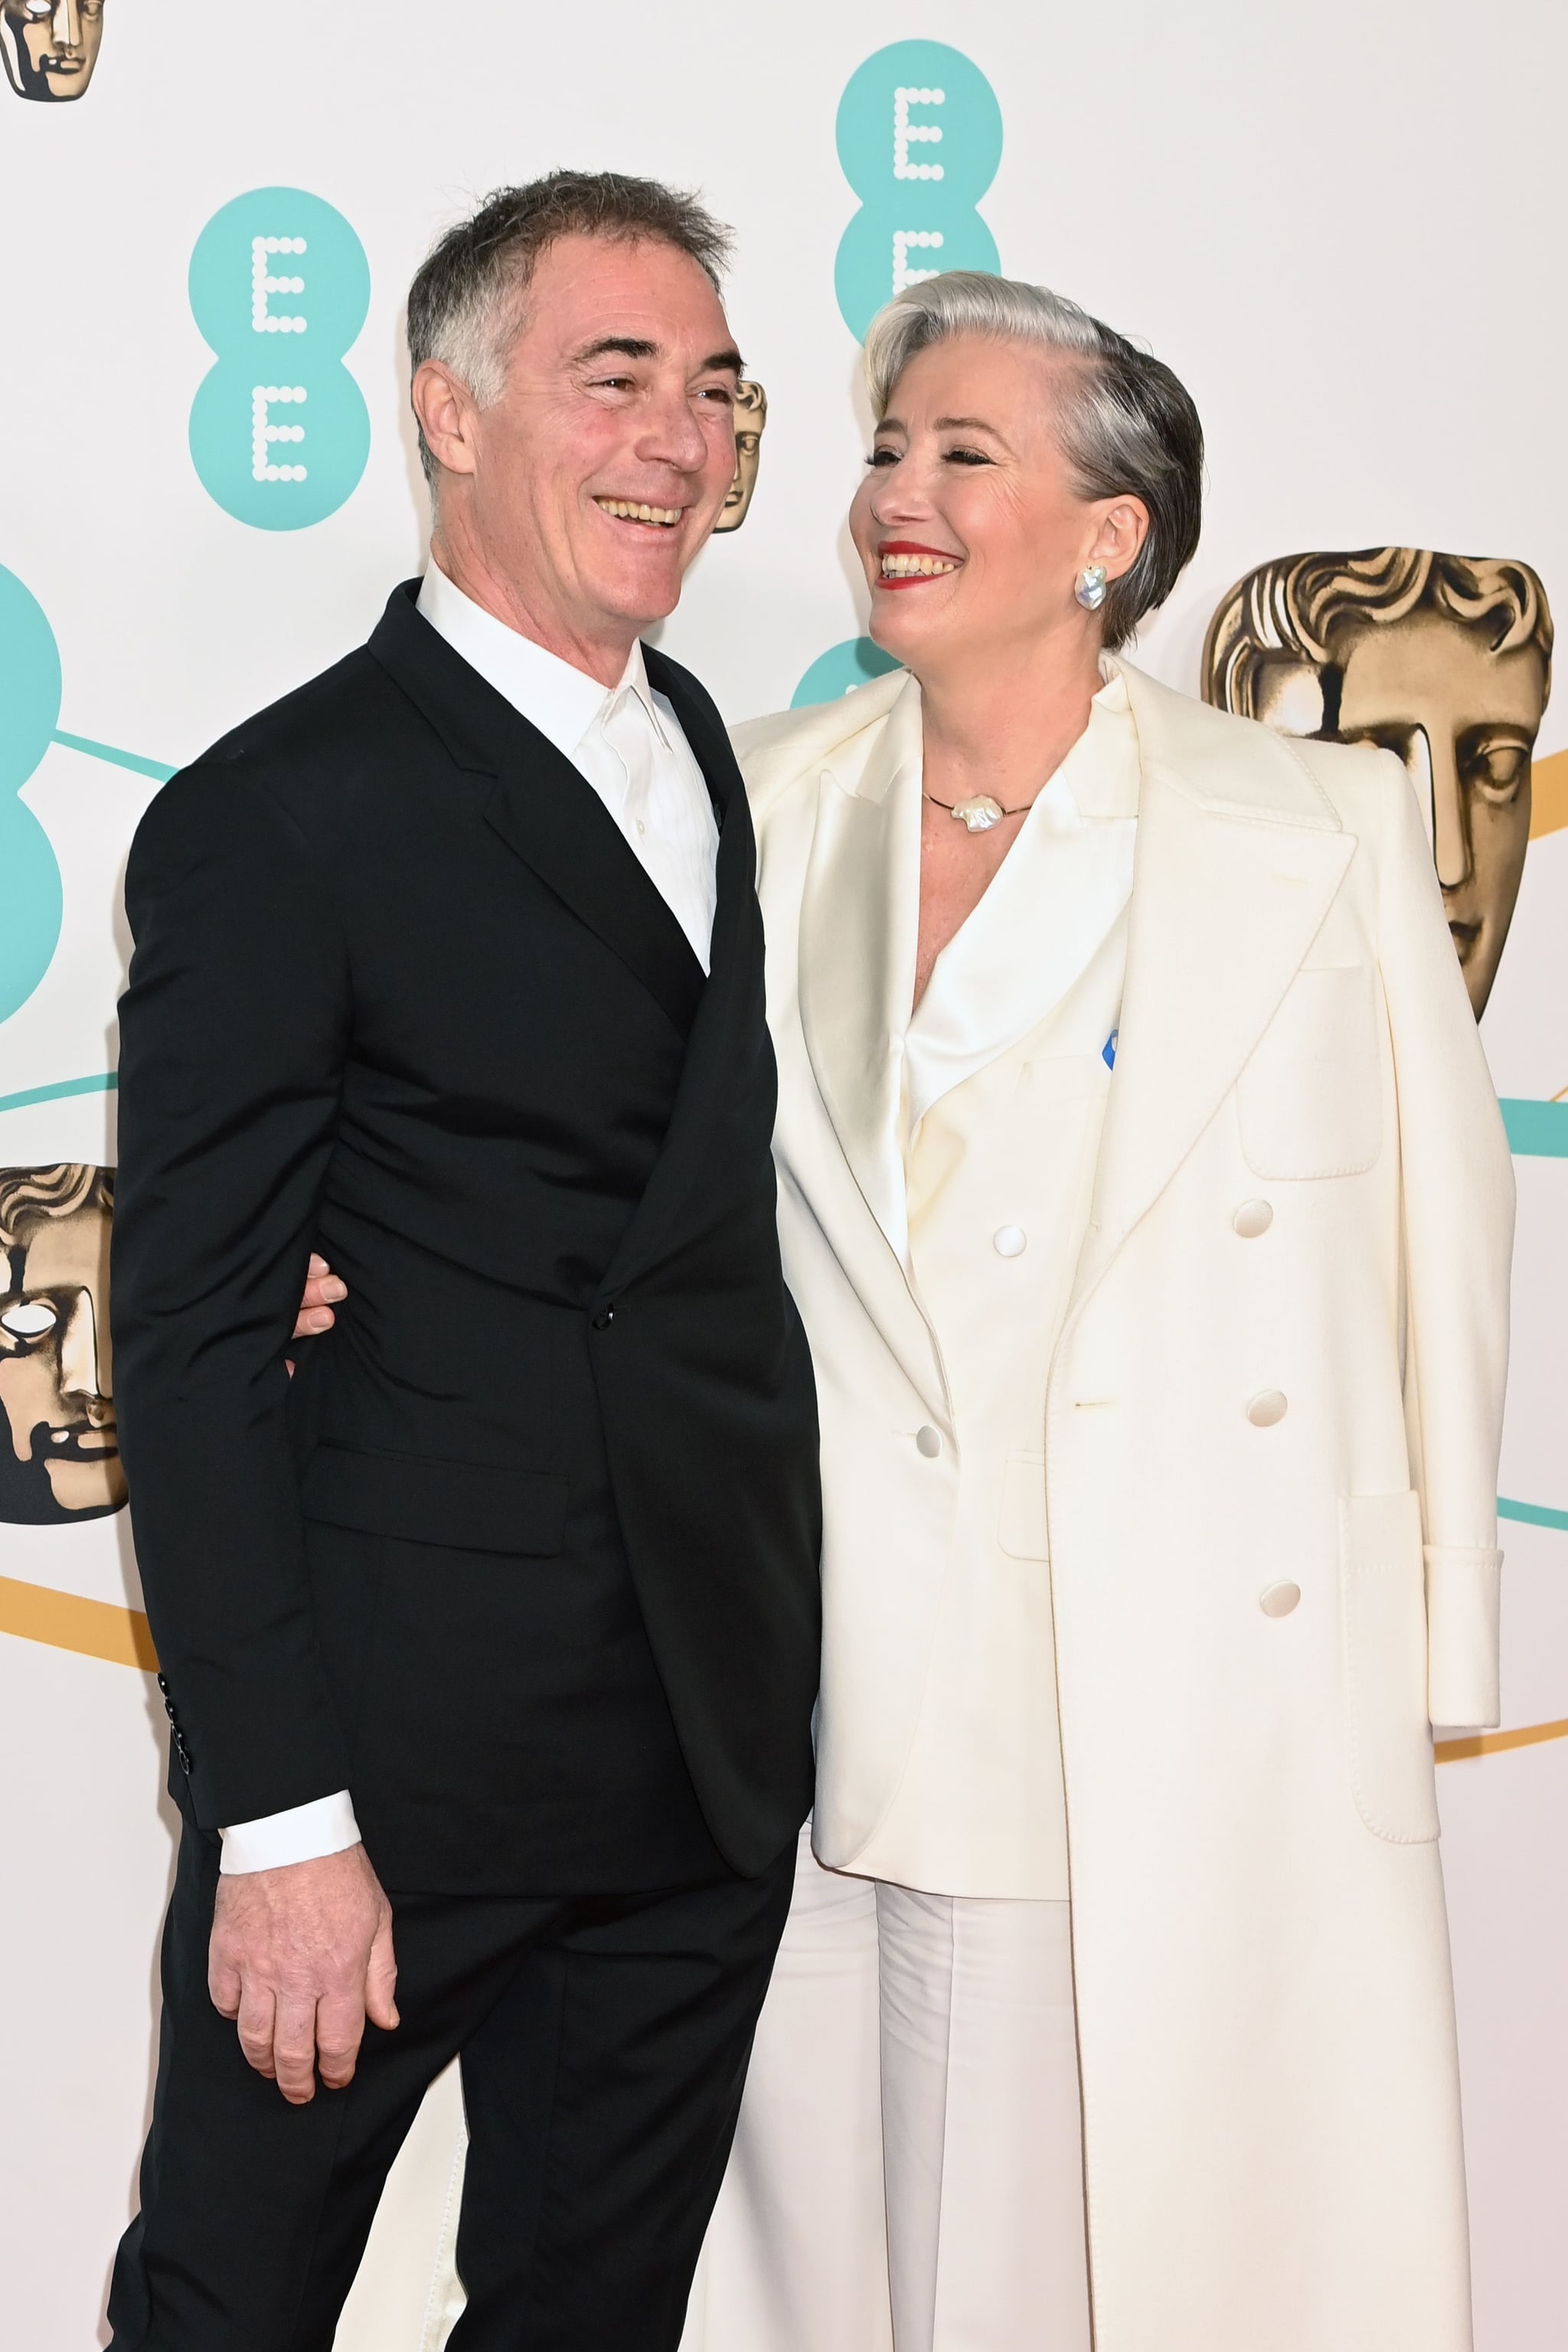 LONDON, ENGLAND - FEBRUARY 19: Greg Wise and Emma Thompson attend the EE BAFTA Film Awards 2023 at The Royal Festival Hall on February 19, 2023 in London, England. (Photo by Dave J Hogan/Getty Images)